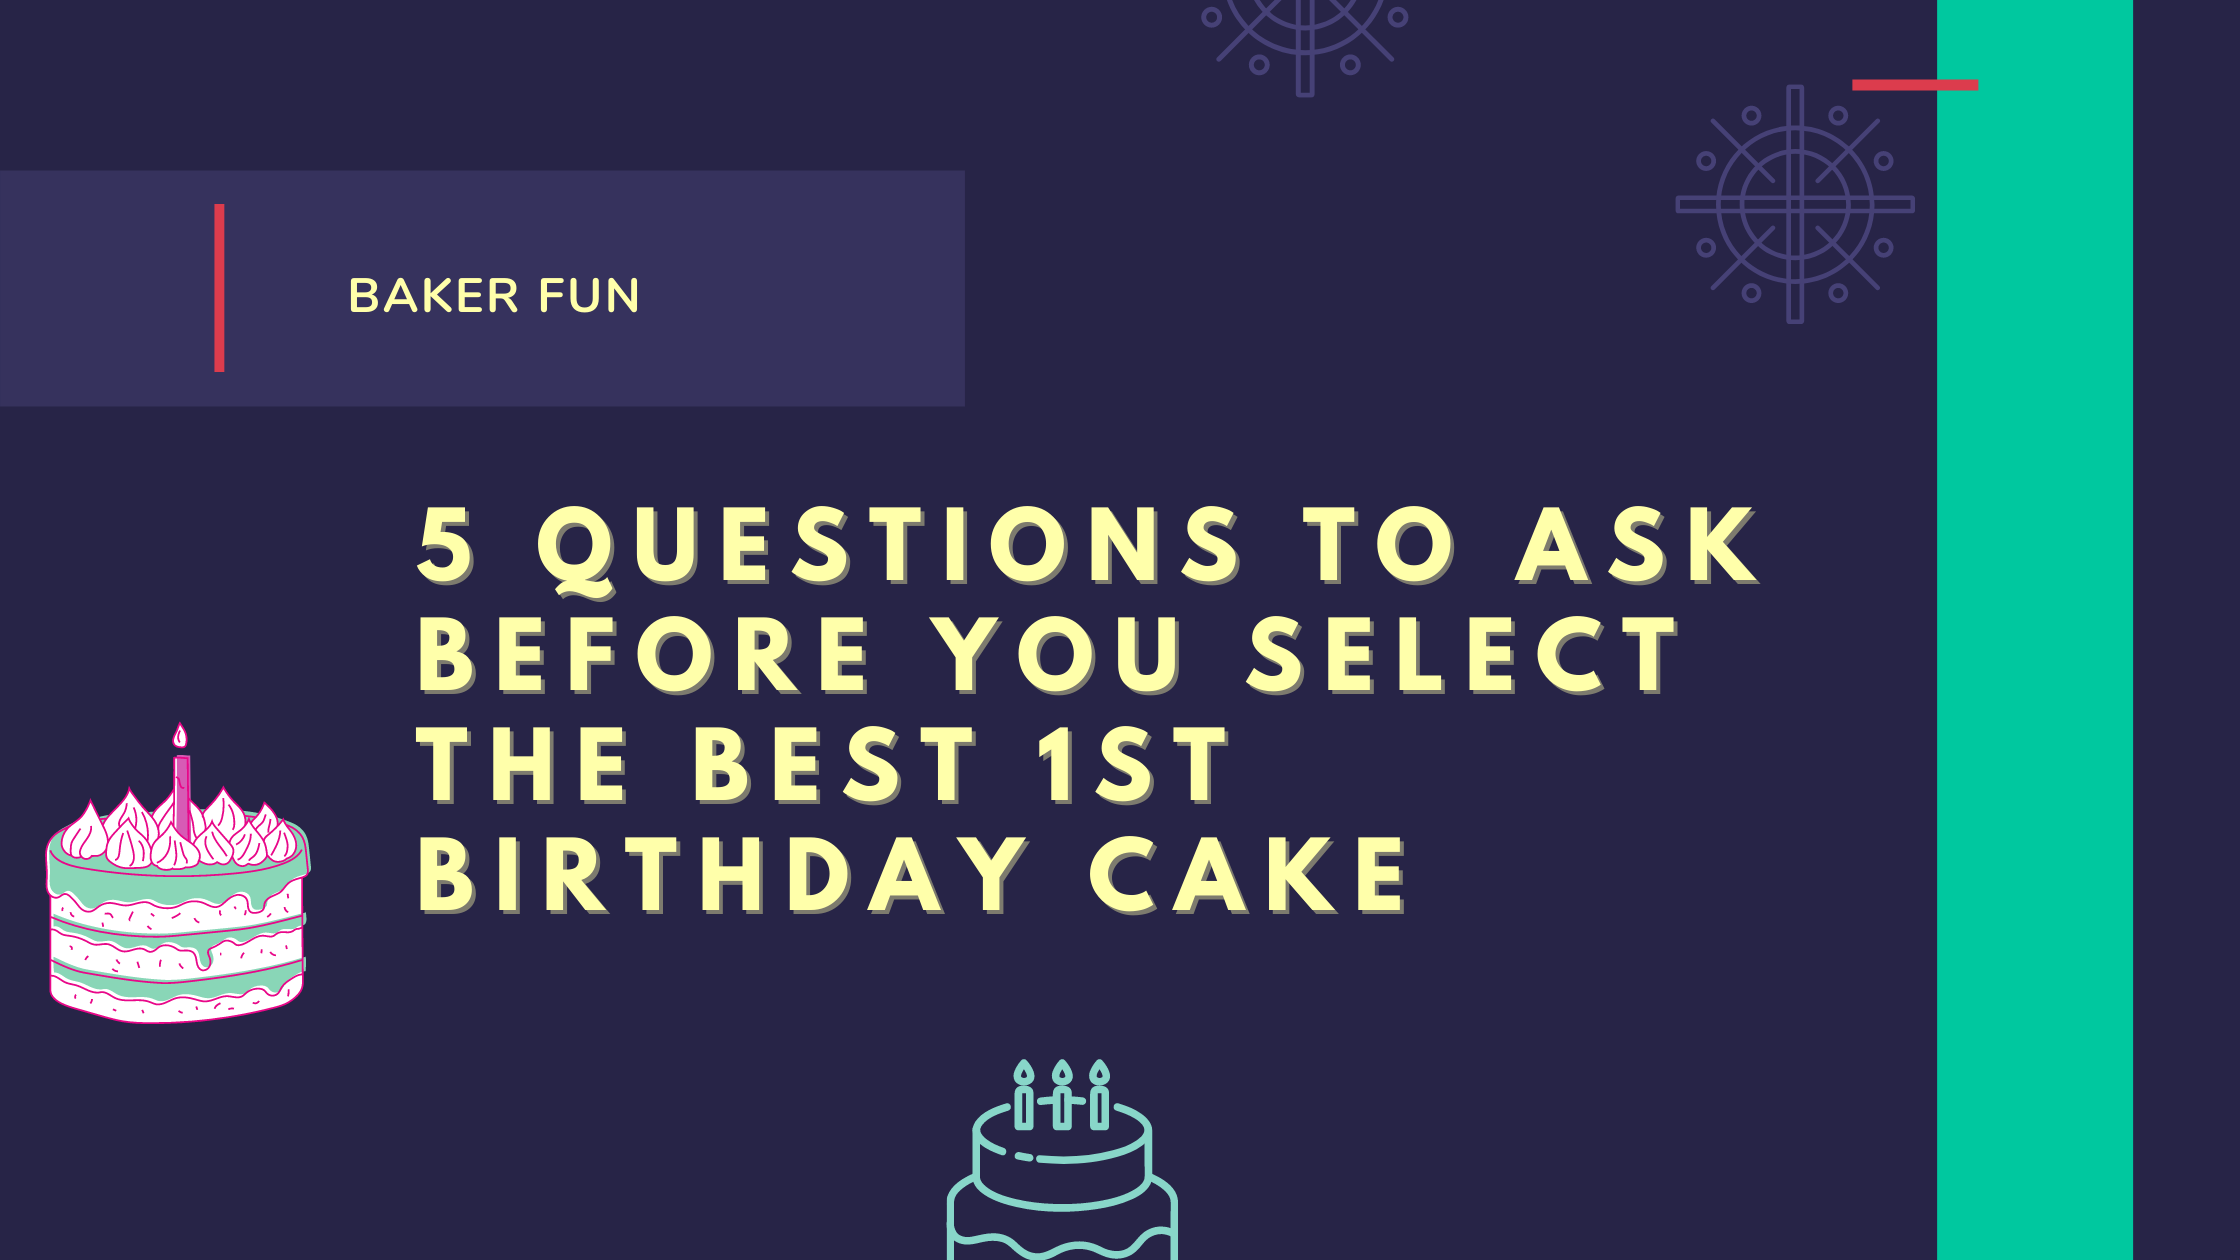 5 Questions to Ask before you Select The Best 1st Birthday Cake